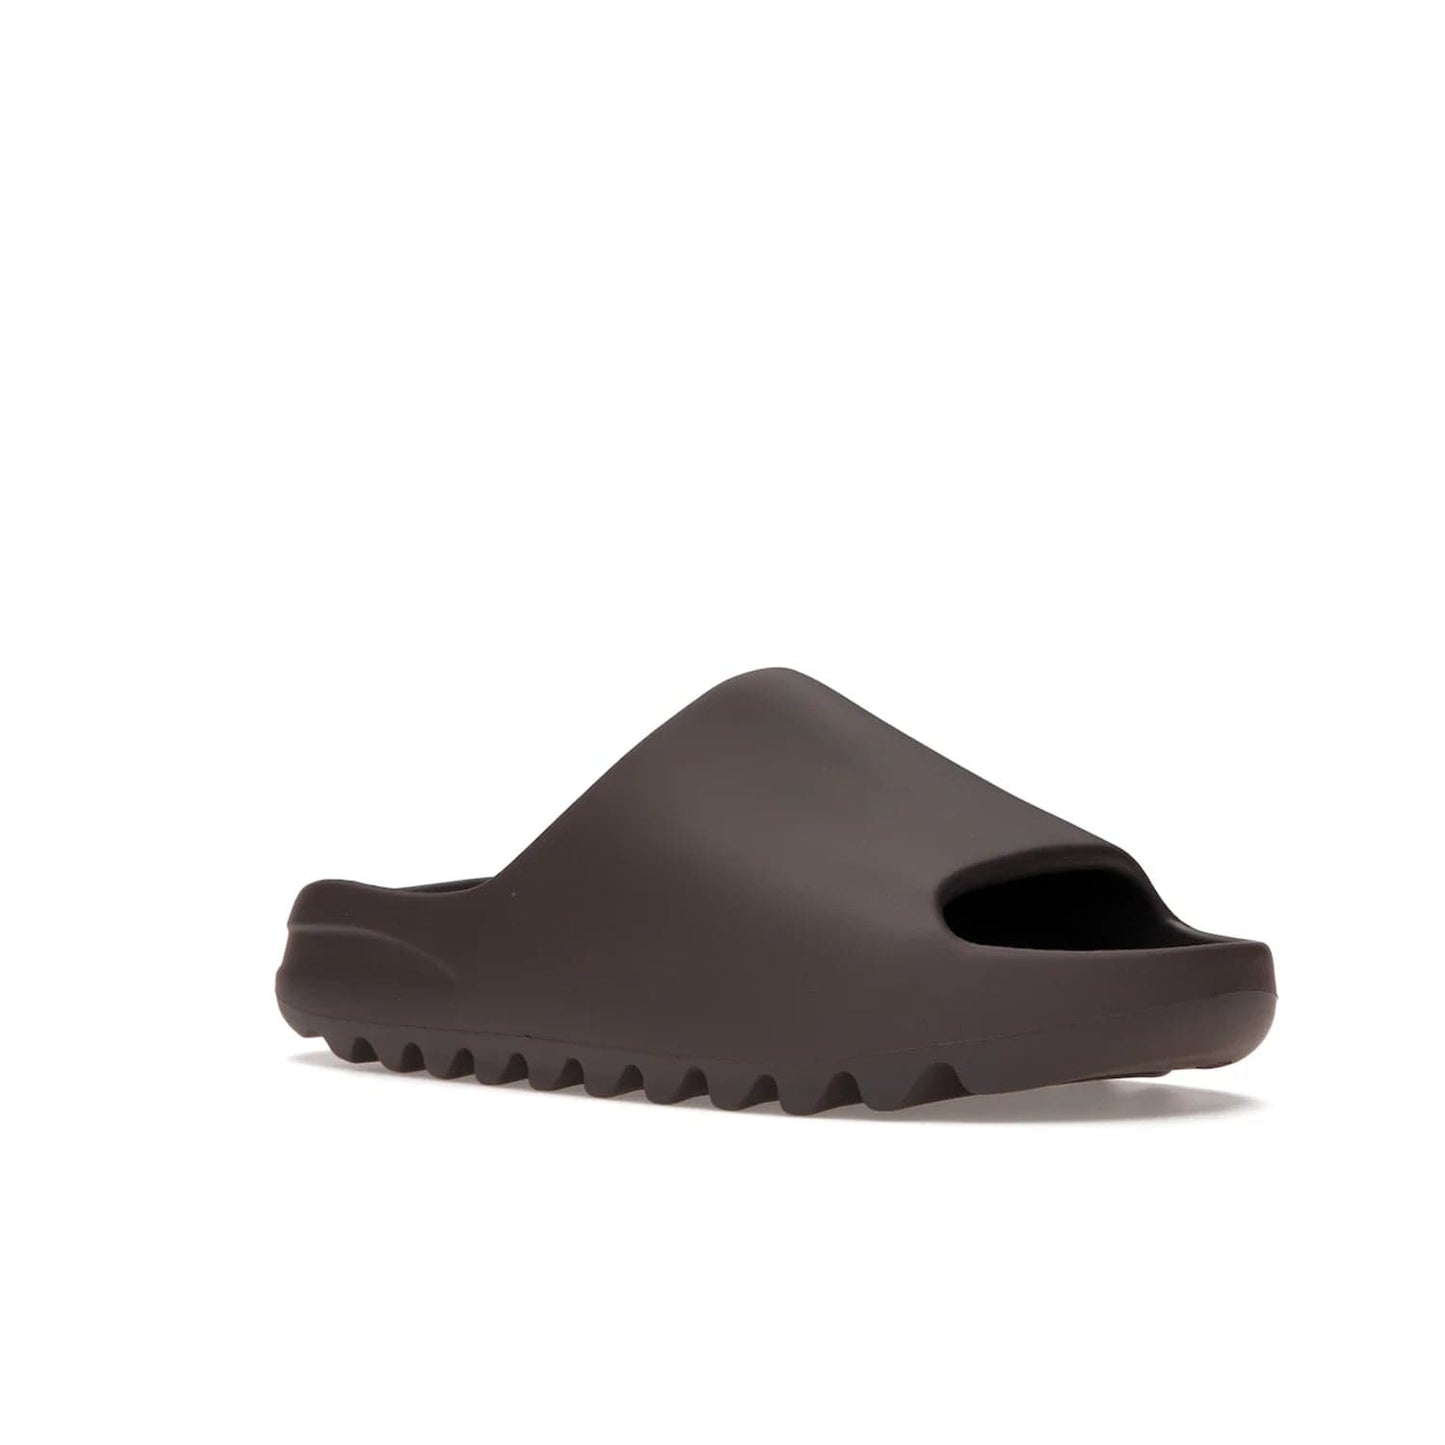 adidas Yeezy Slide Soot - Image 5 - Only at www.BallersClubKickz.com - Shop the Yeezy Slide Soot sneaker by Adidas, a sleek blend of form and function. Monochrome silhouette in Soot/Soot/Soot. Lightweight EVA foam offers comfort and durability. Get the must-have style today.